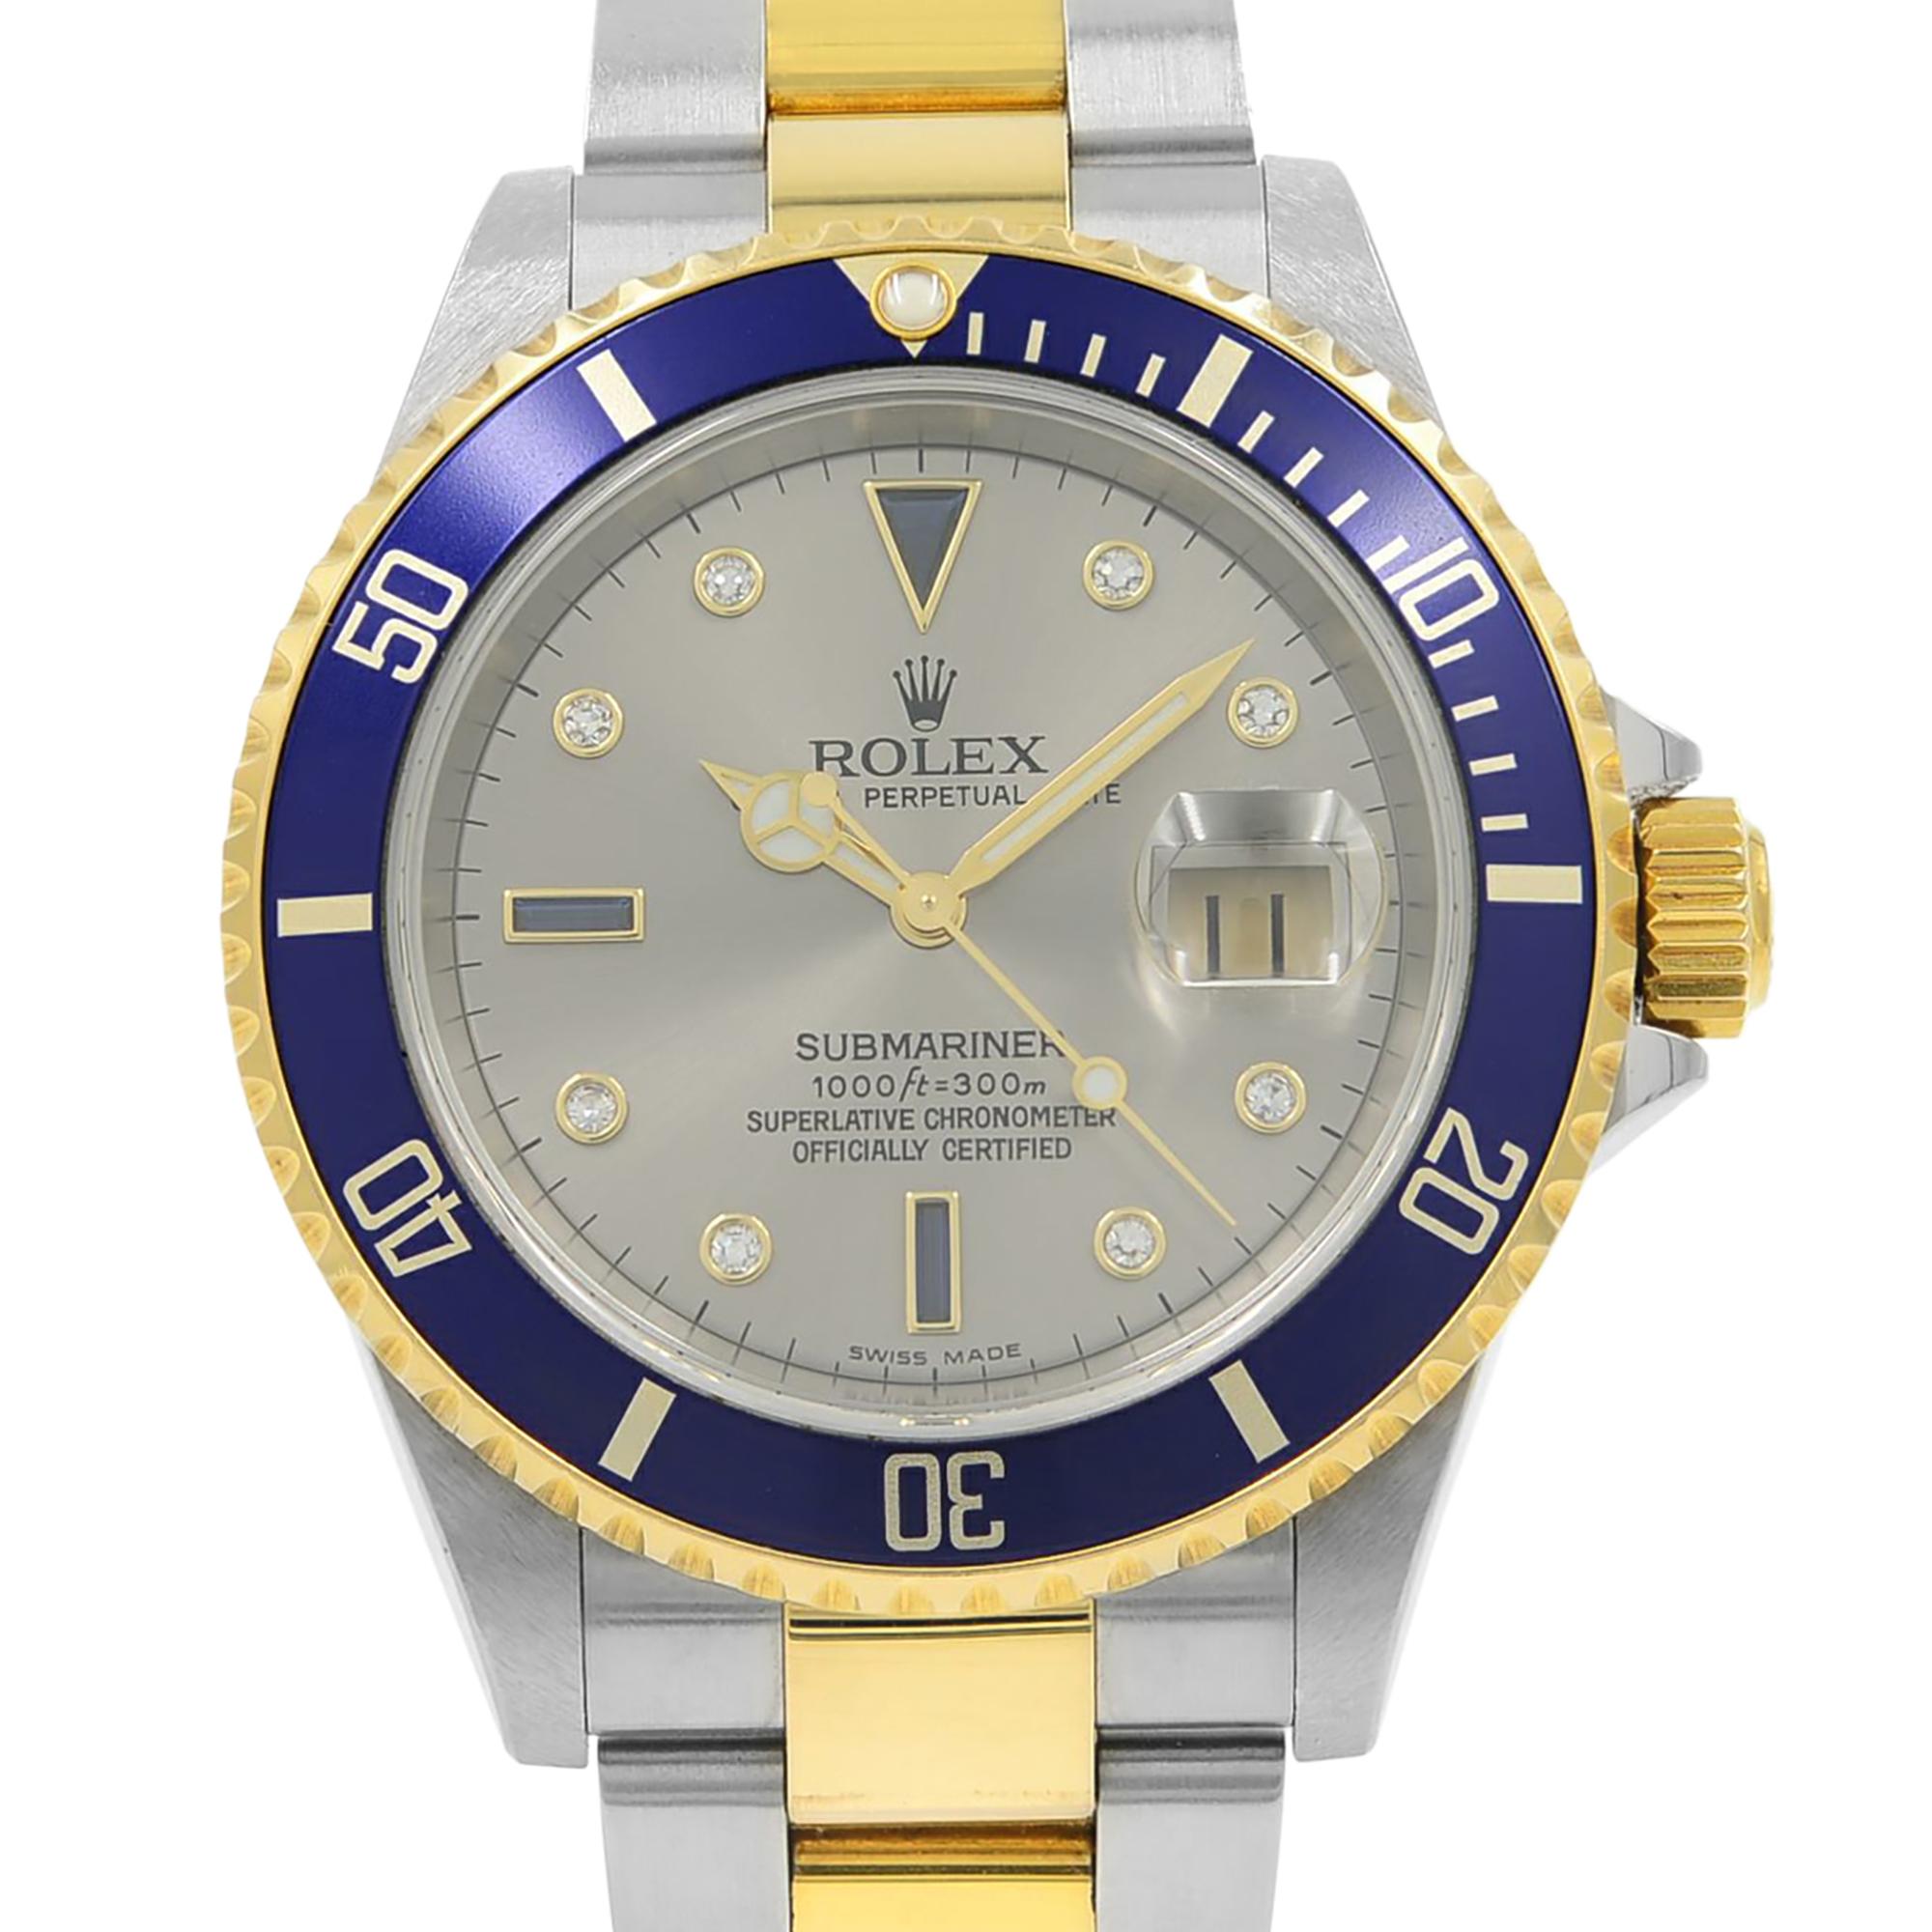 Z-Series. Pre-owned condition. The bezel insert has minor blemishes. Comes with the manufacturer's box but No papers. Covered by a 1-year Chronostore warranty.
Details:
Brand Rolex
Department Men
Model Number 16613 T
Model Rolex Submariner
Style